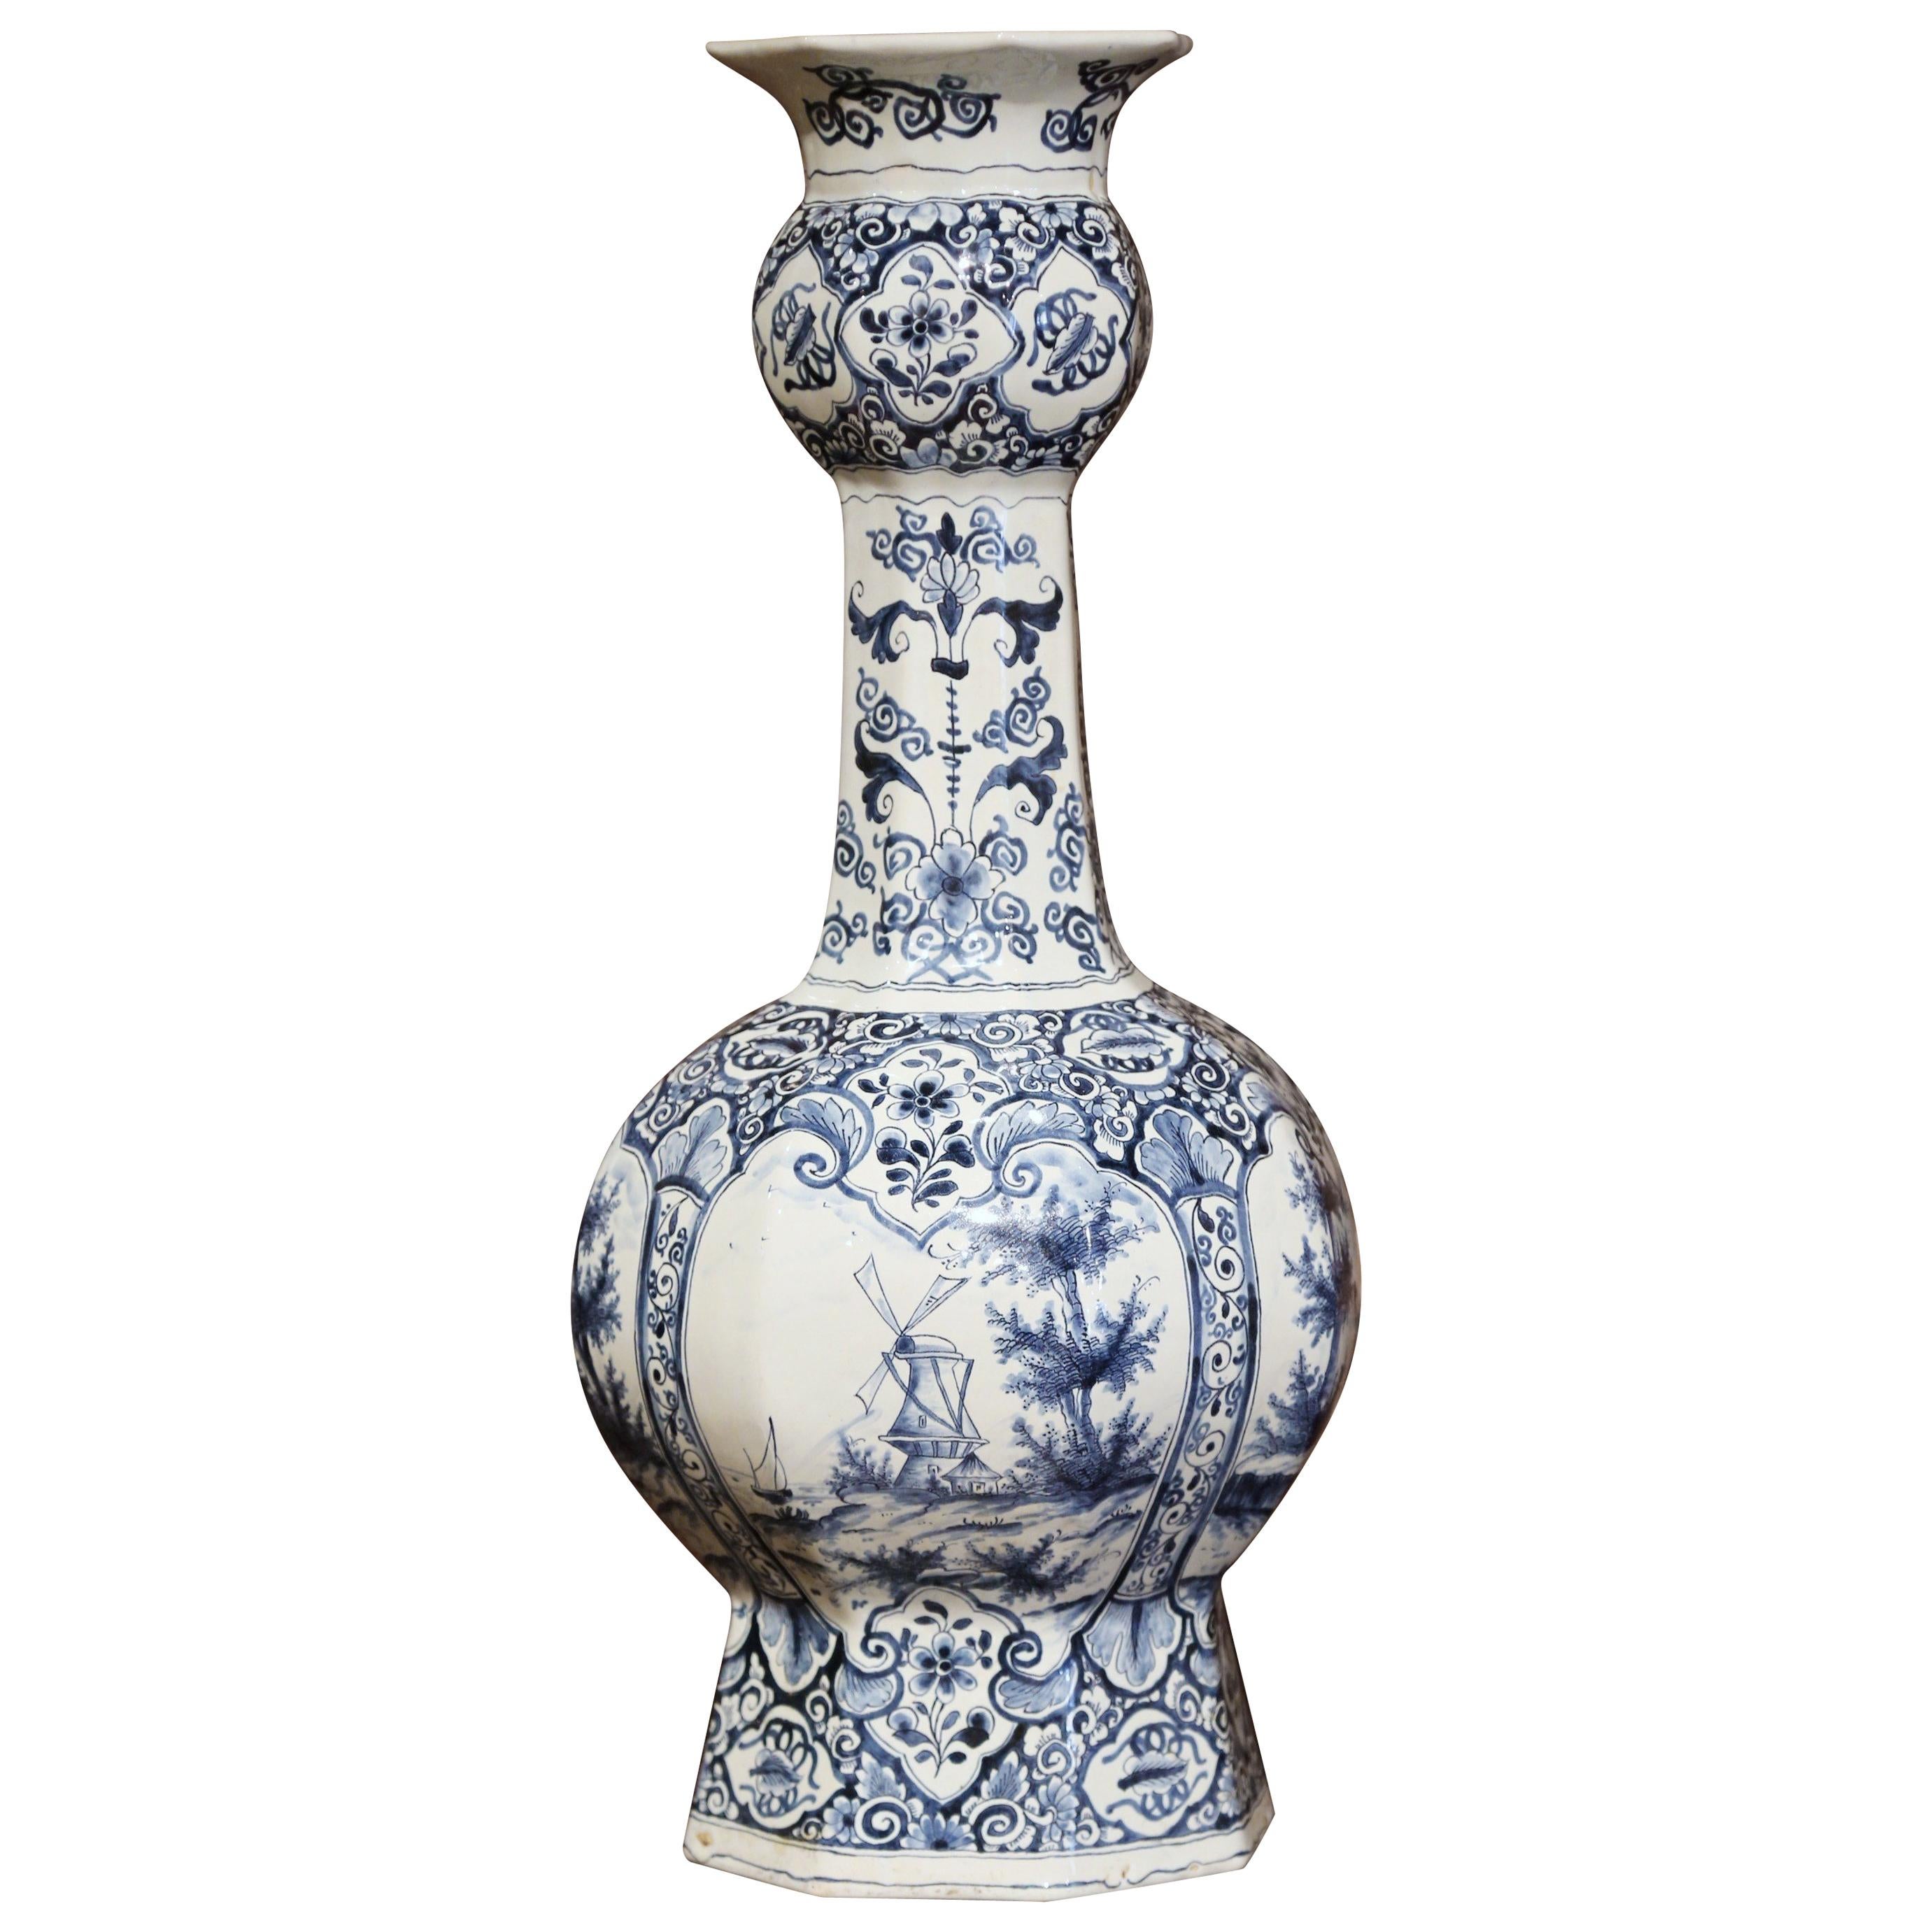 19th Century Dutch Blue and White Delft Vase with Courting and Windmill Scenes